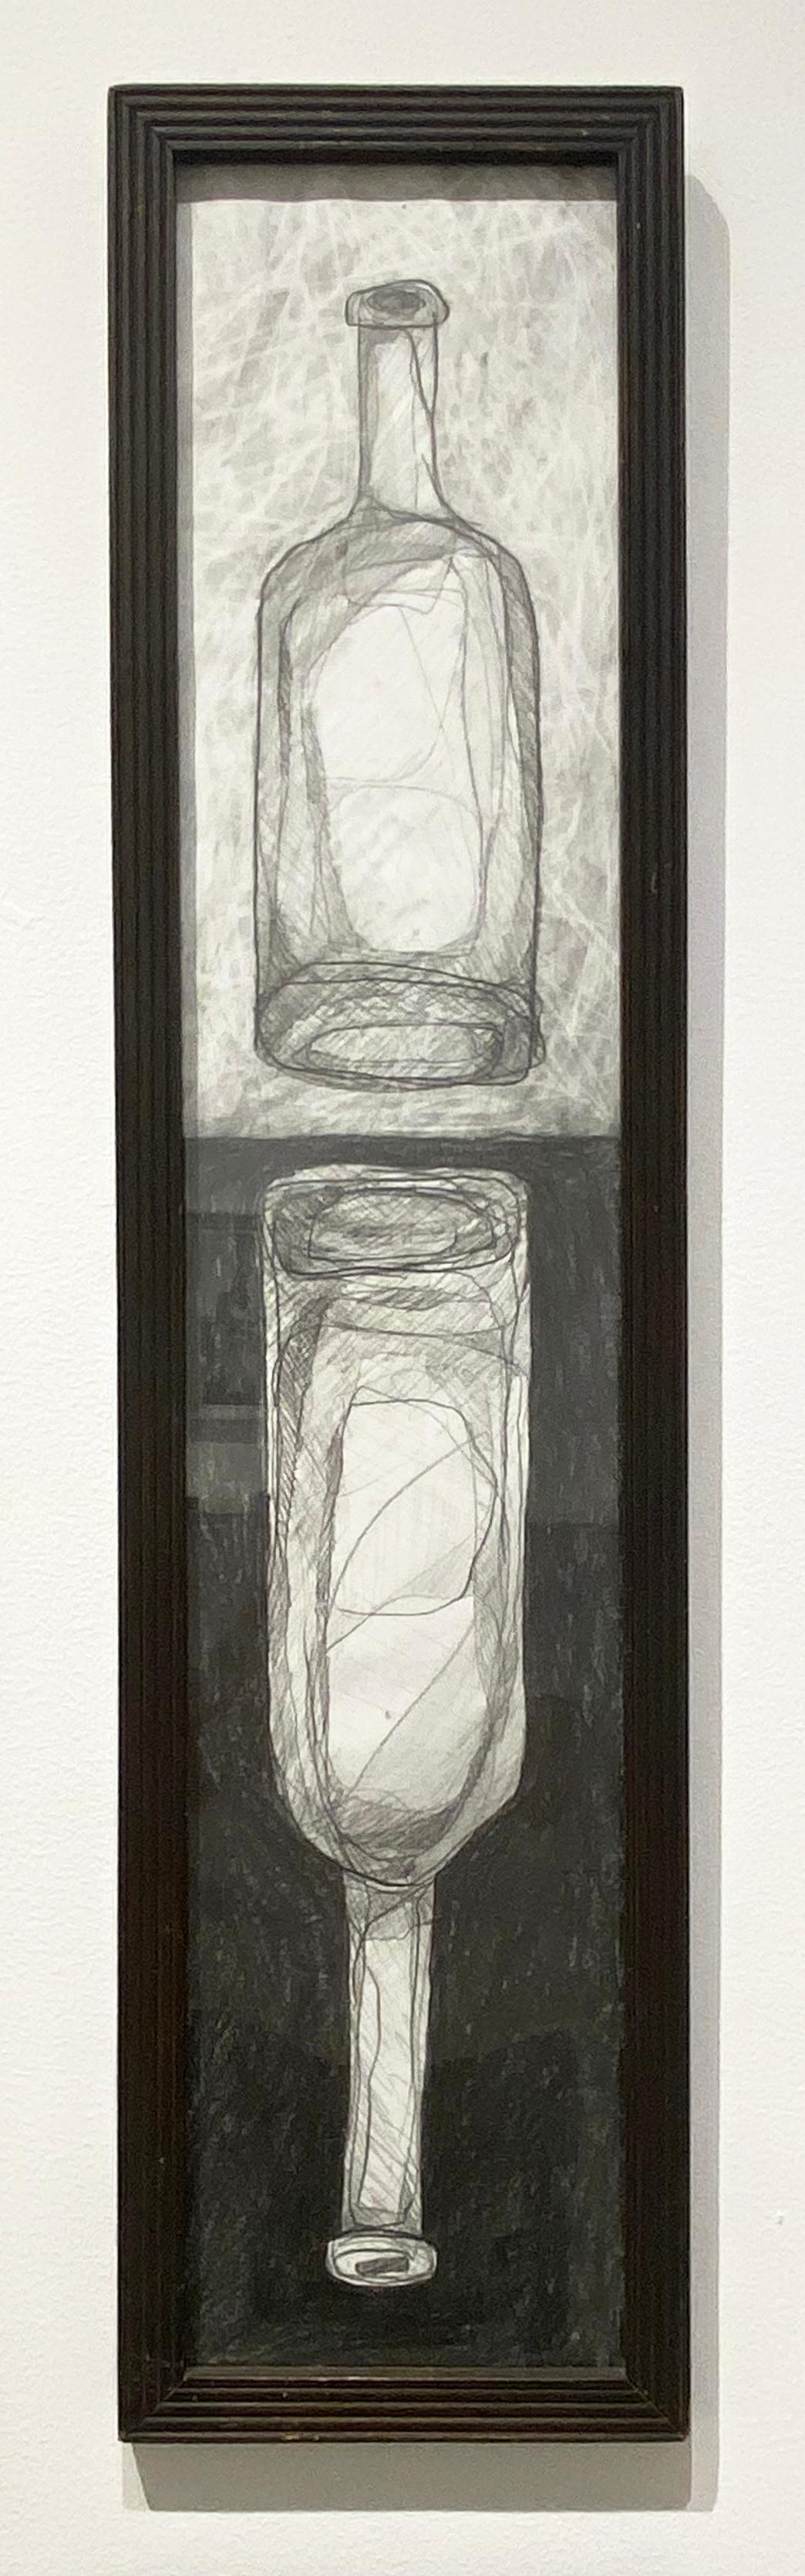 David Dew Bruner Abstract Drawing – Morandi 22 (Contemporary Abstracted Still life drawing in Vintage Frame)